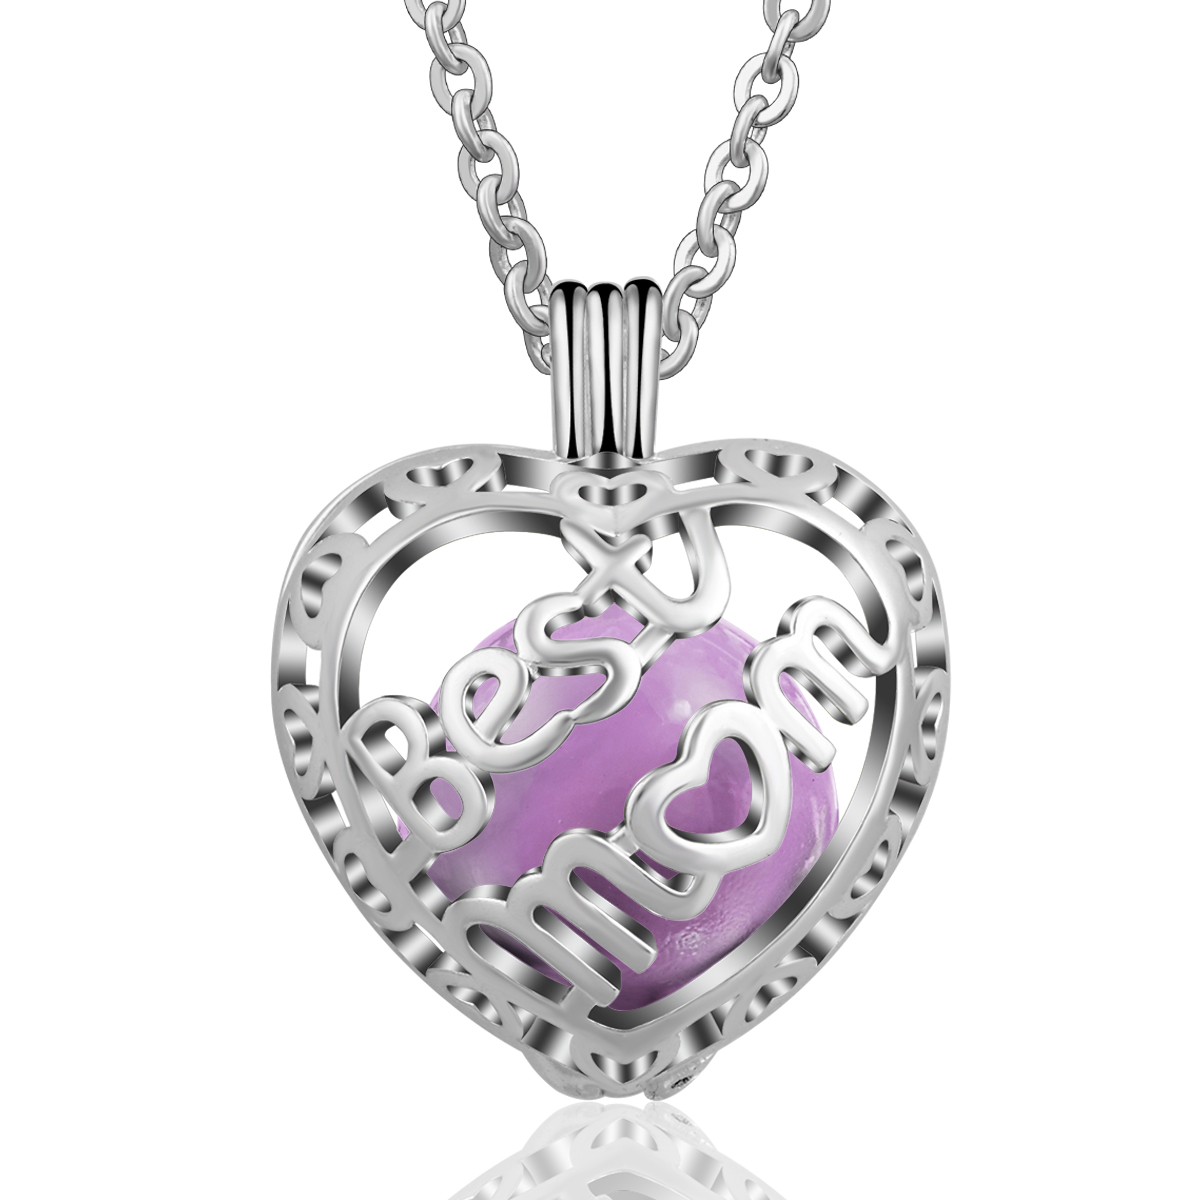 Merryshine Jewelry China Factory Sale 18mm Silver Bola Locket Necklace for Best Mom